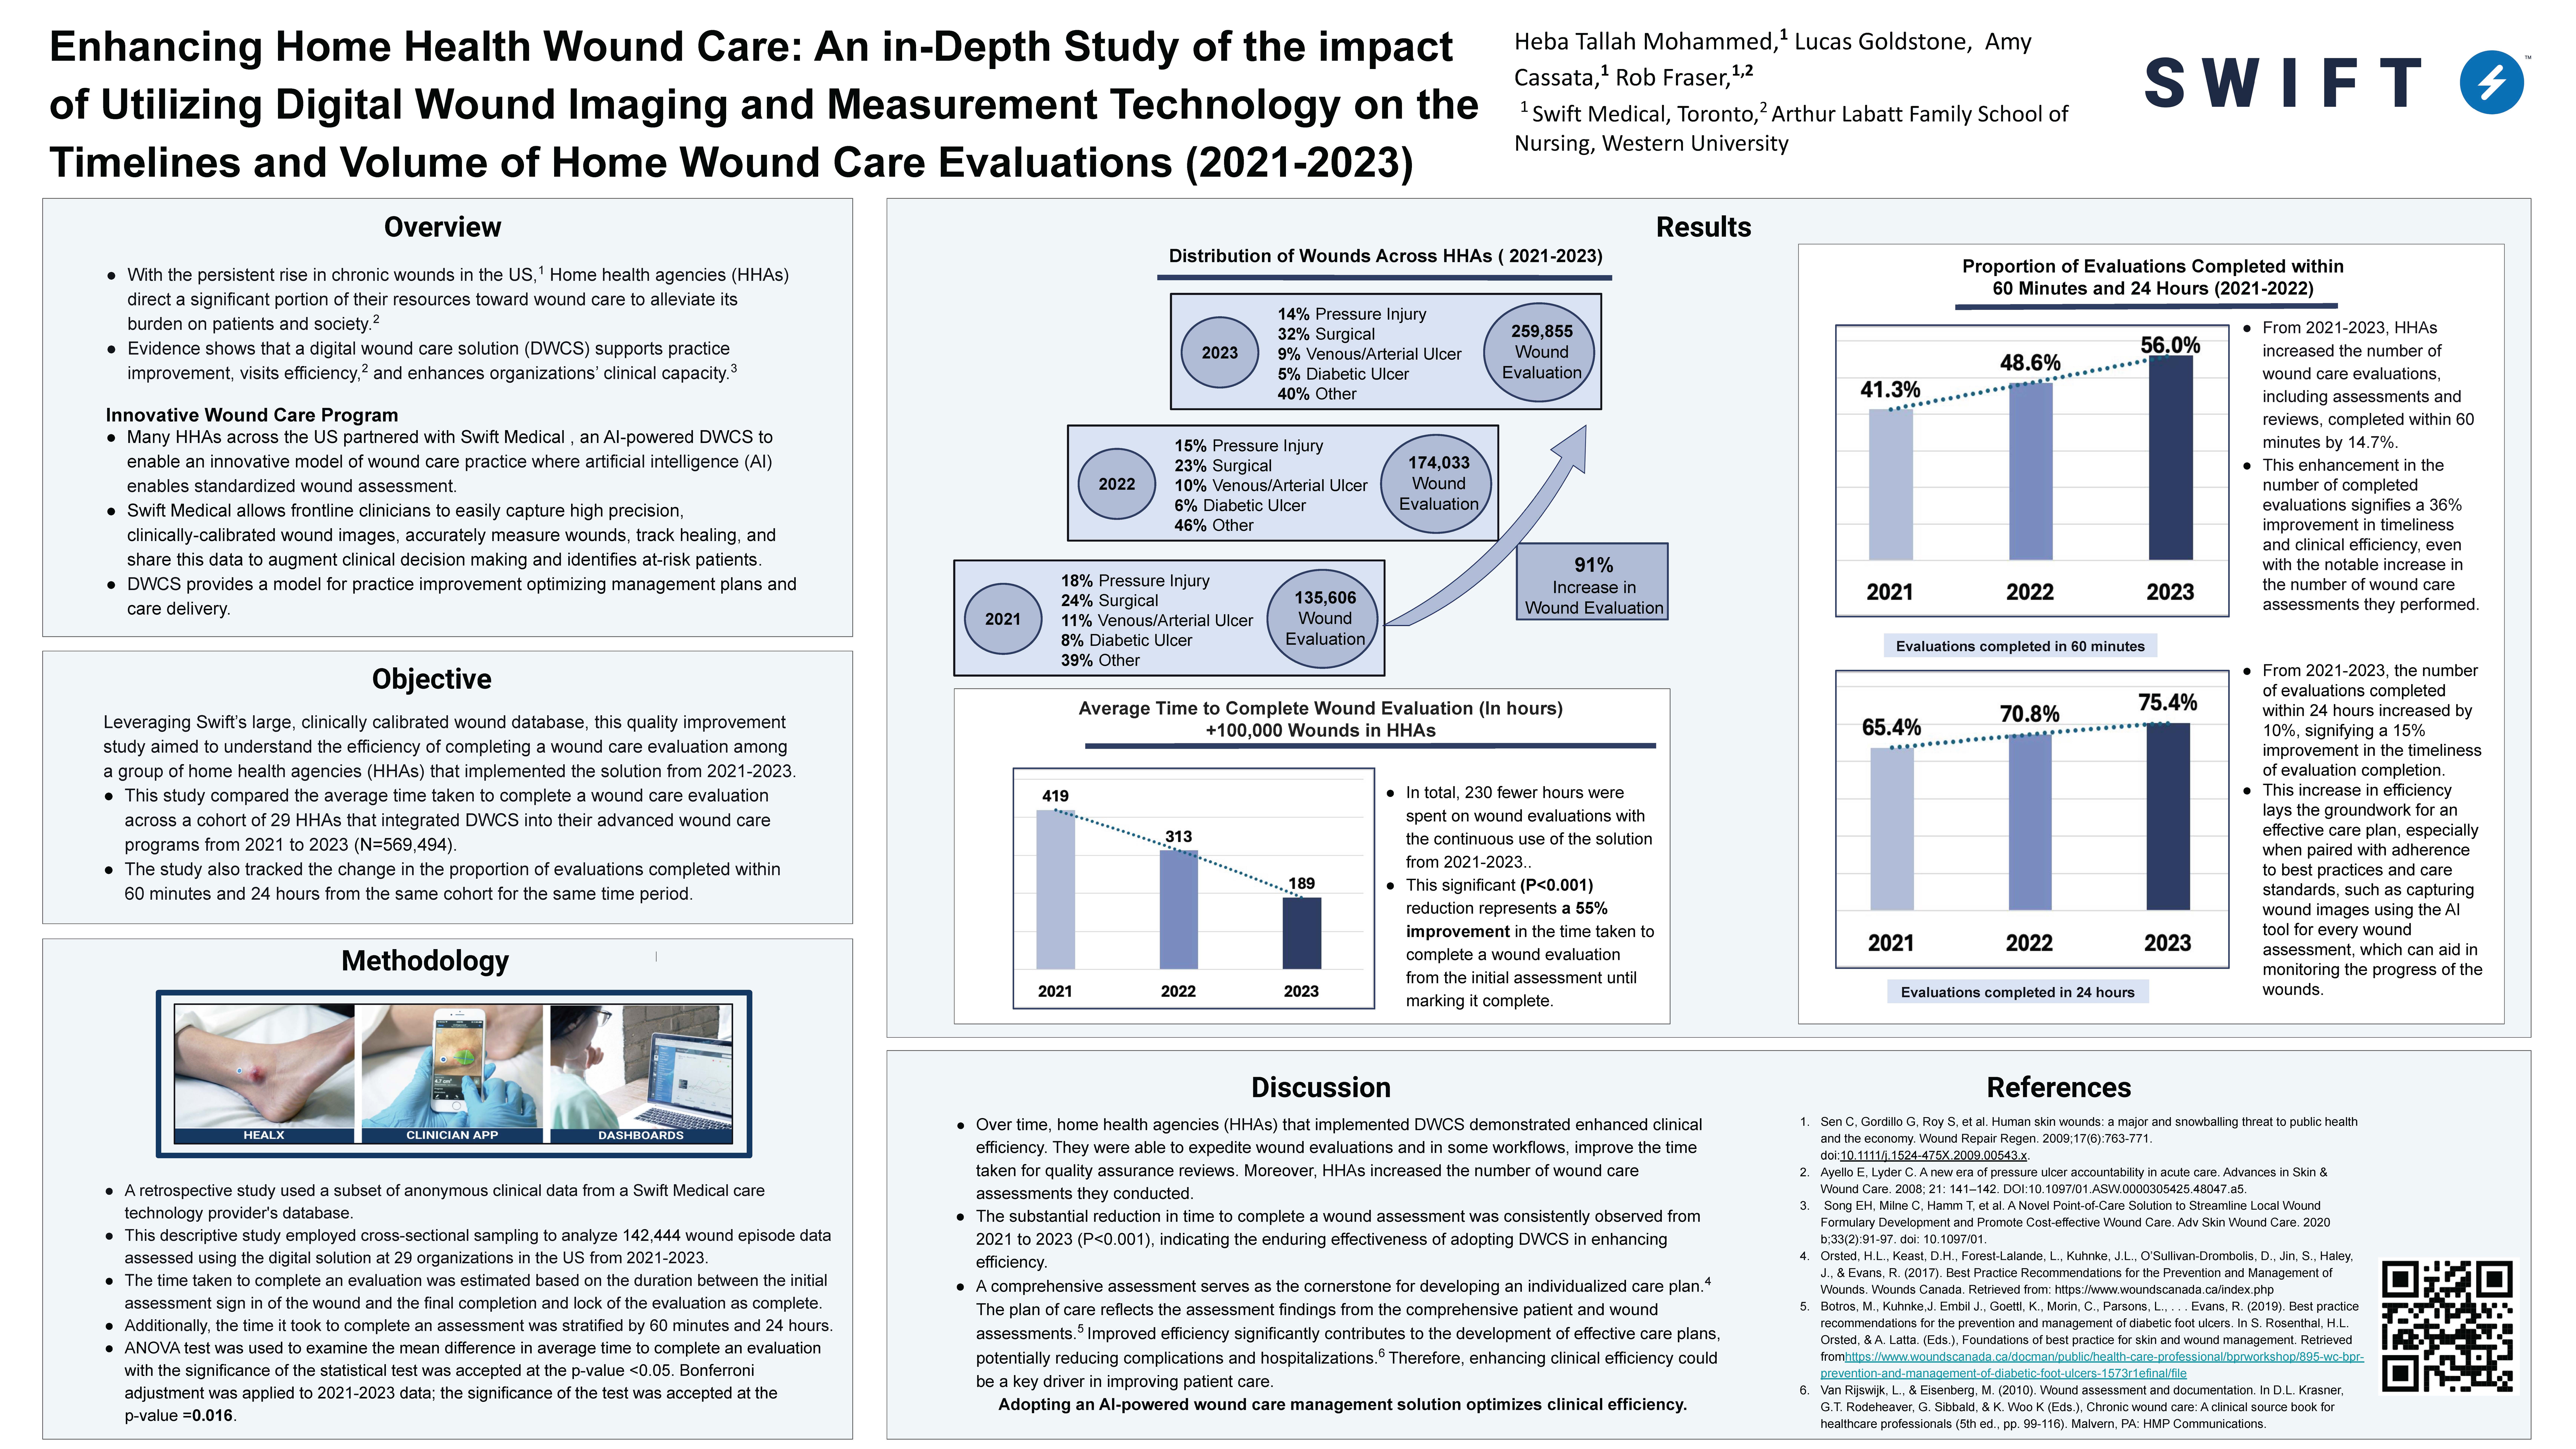 Enhancing Home Health Wound Care An in-Depth Study of the impact of Utilizing Digital Wound Imaging